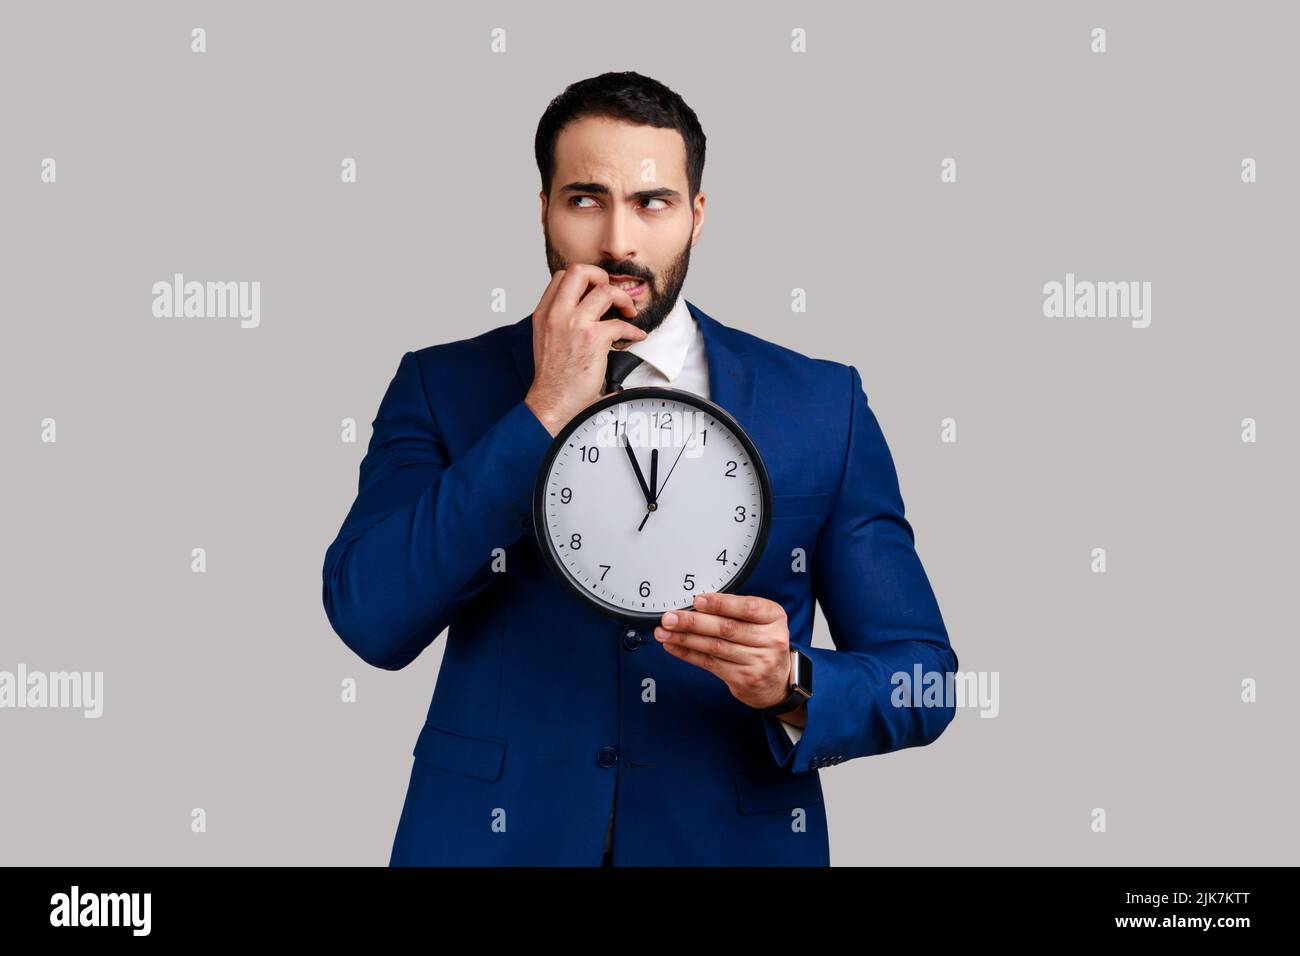 Portrait of attractive nervous bearded man biting nails holding big wall clock, deadline, need hurry up, wearing official style suit. Indoor studio shot isolated on gray background. Stock Photo